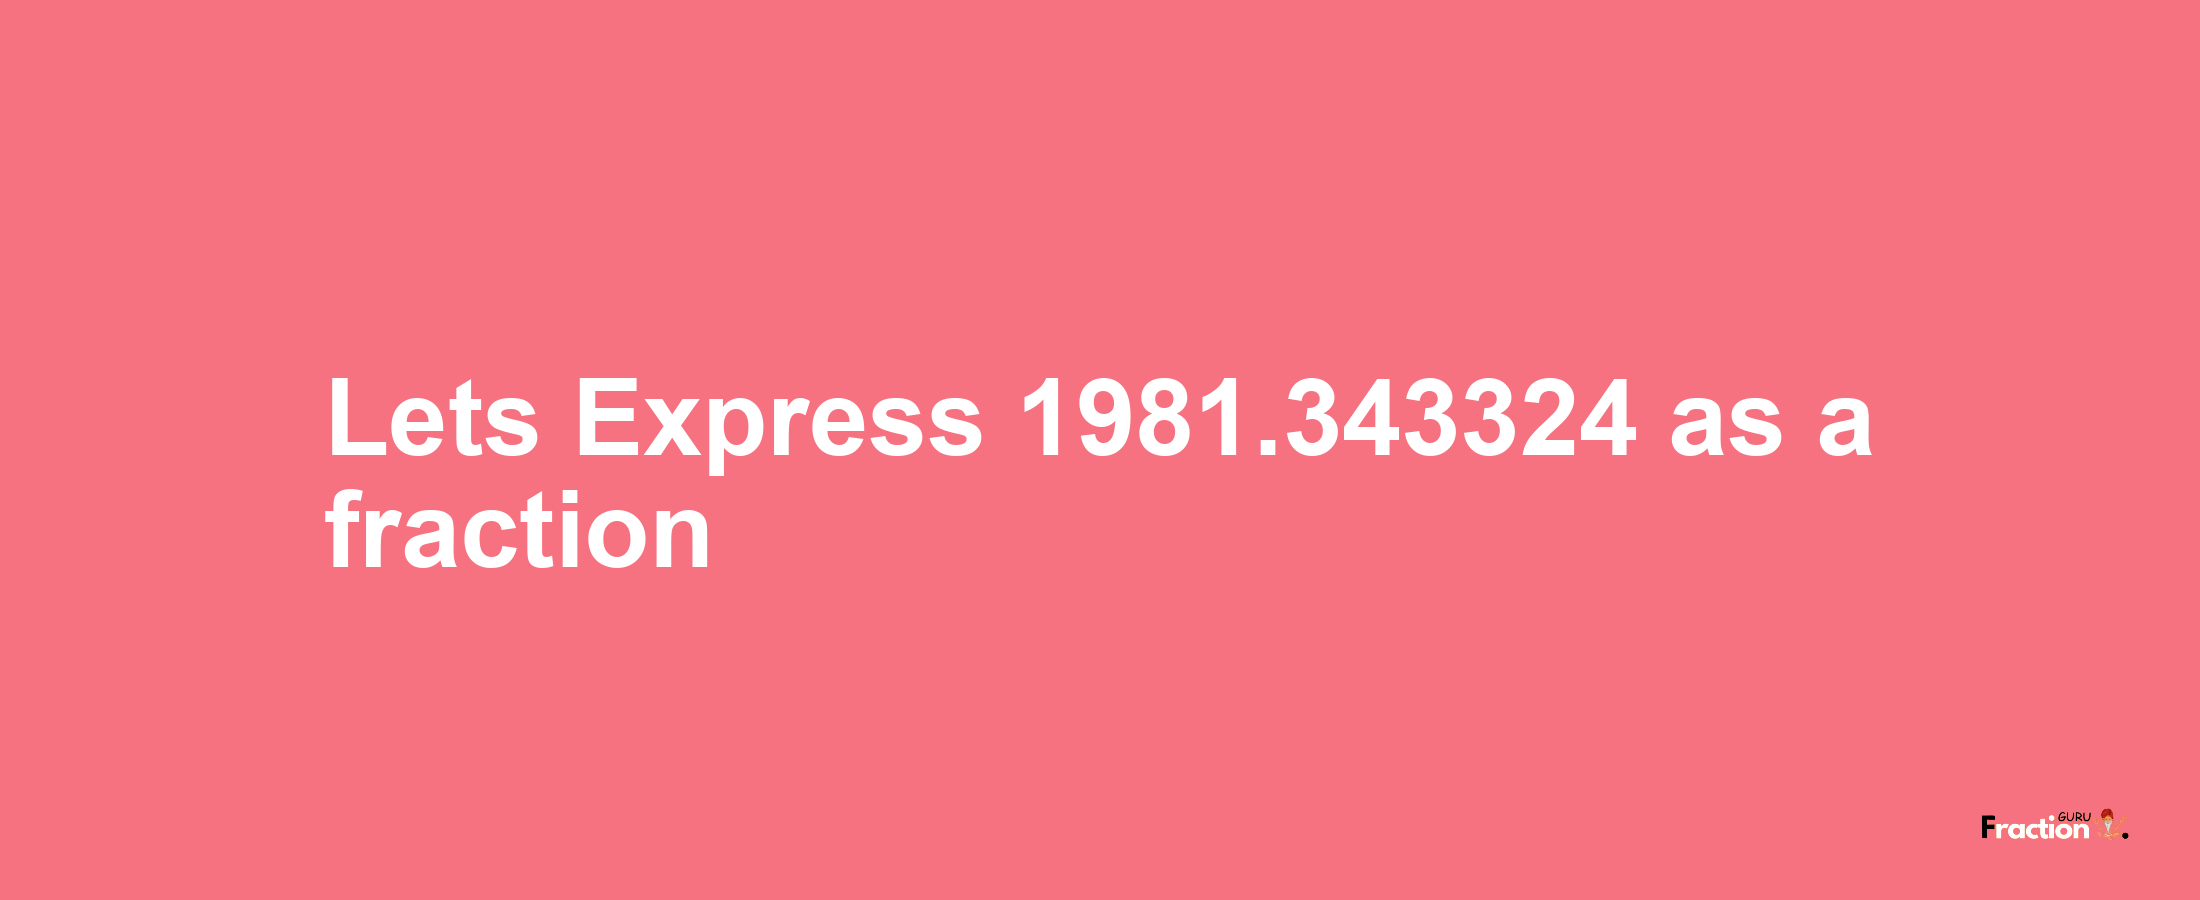 Lets Express 1981.343324 as afraction